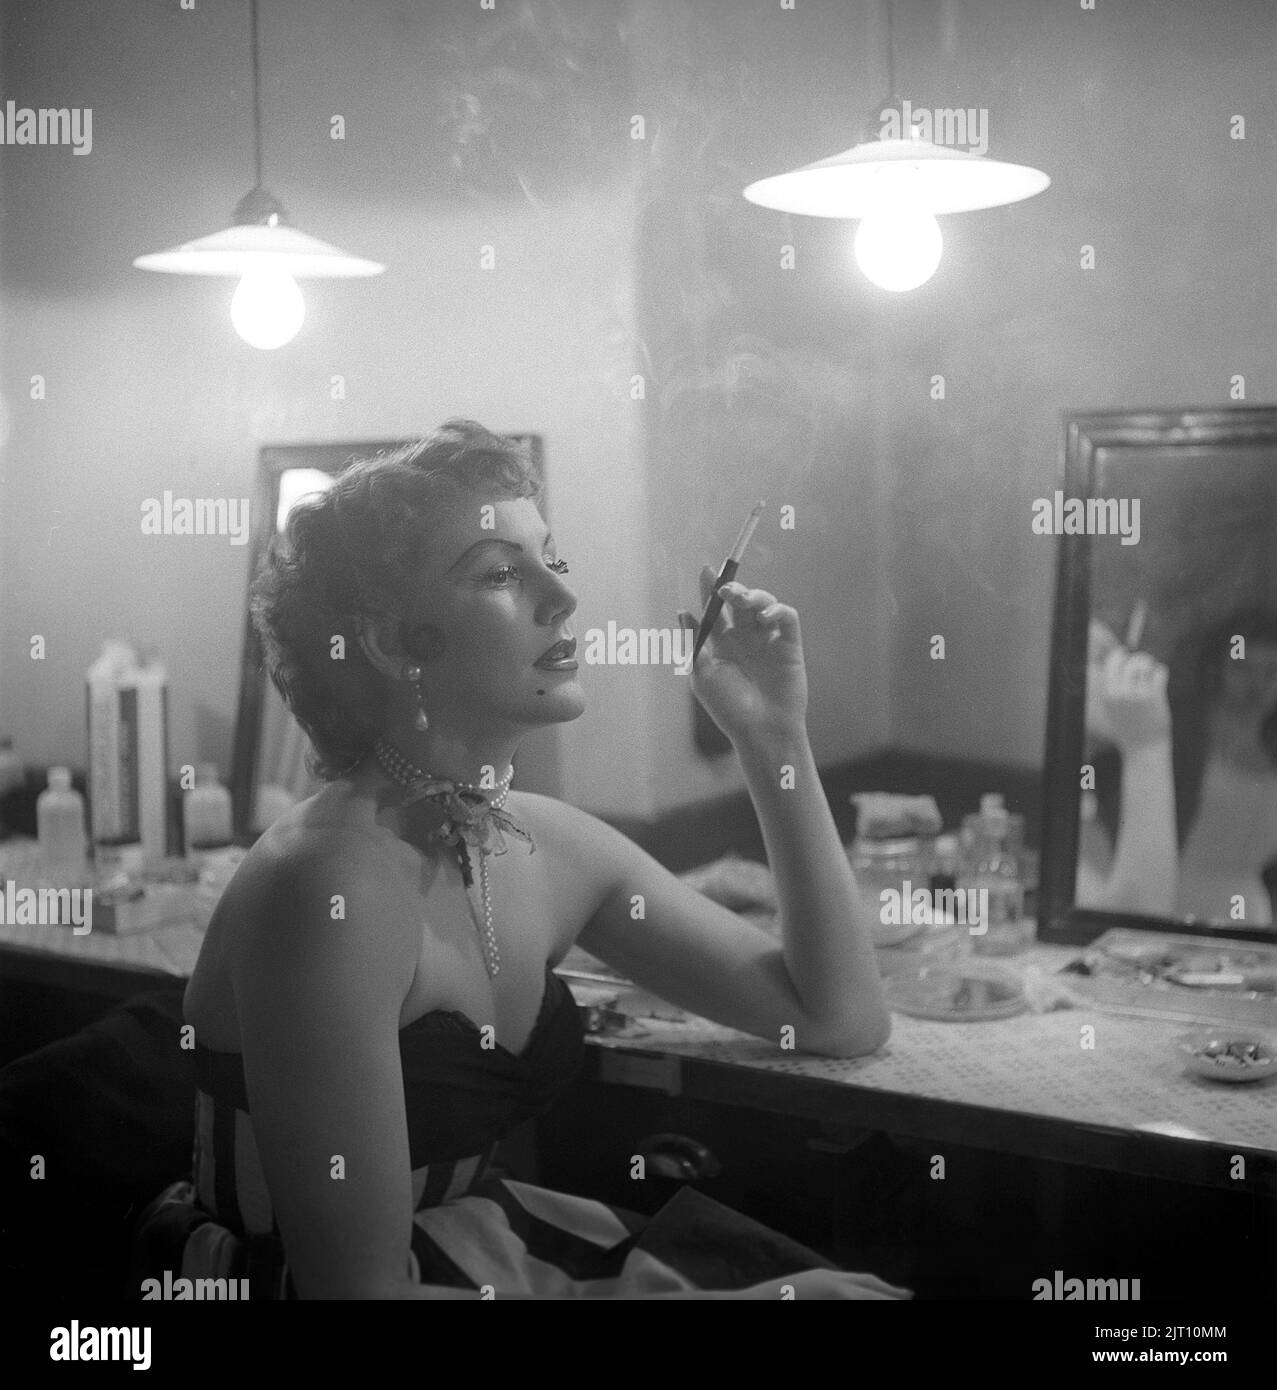 Karin Maria Elisabet Mathisen, known as Topsy Hakansson, born january 12 1926. Swedish dancer and actress pictures in her dressing room behind the theatre stage while having a cigarette. She uses a cigarette holder and that makes the picture elegant. Sweden 1952 Kristoffersson ref BH99-7 Stock Photo